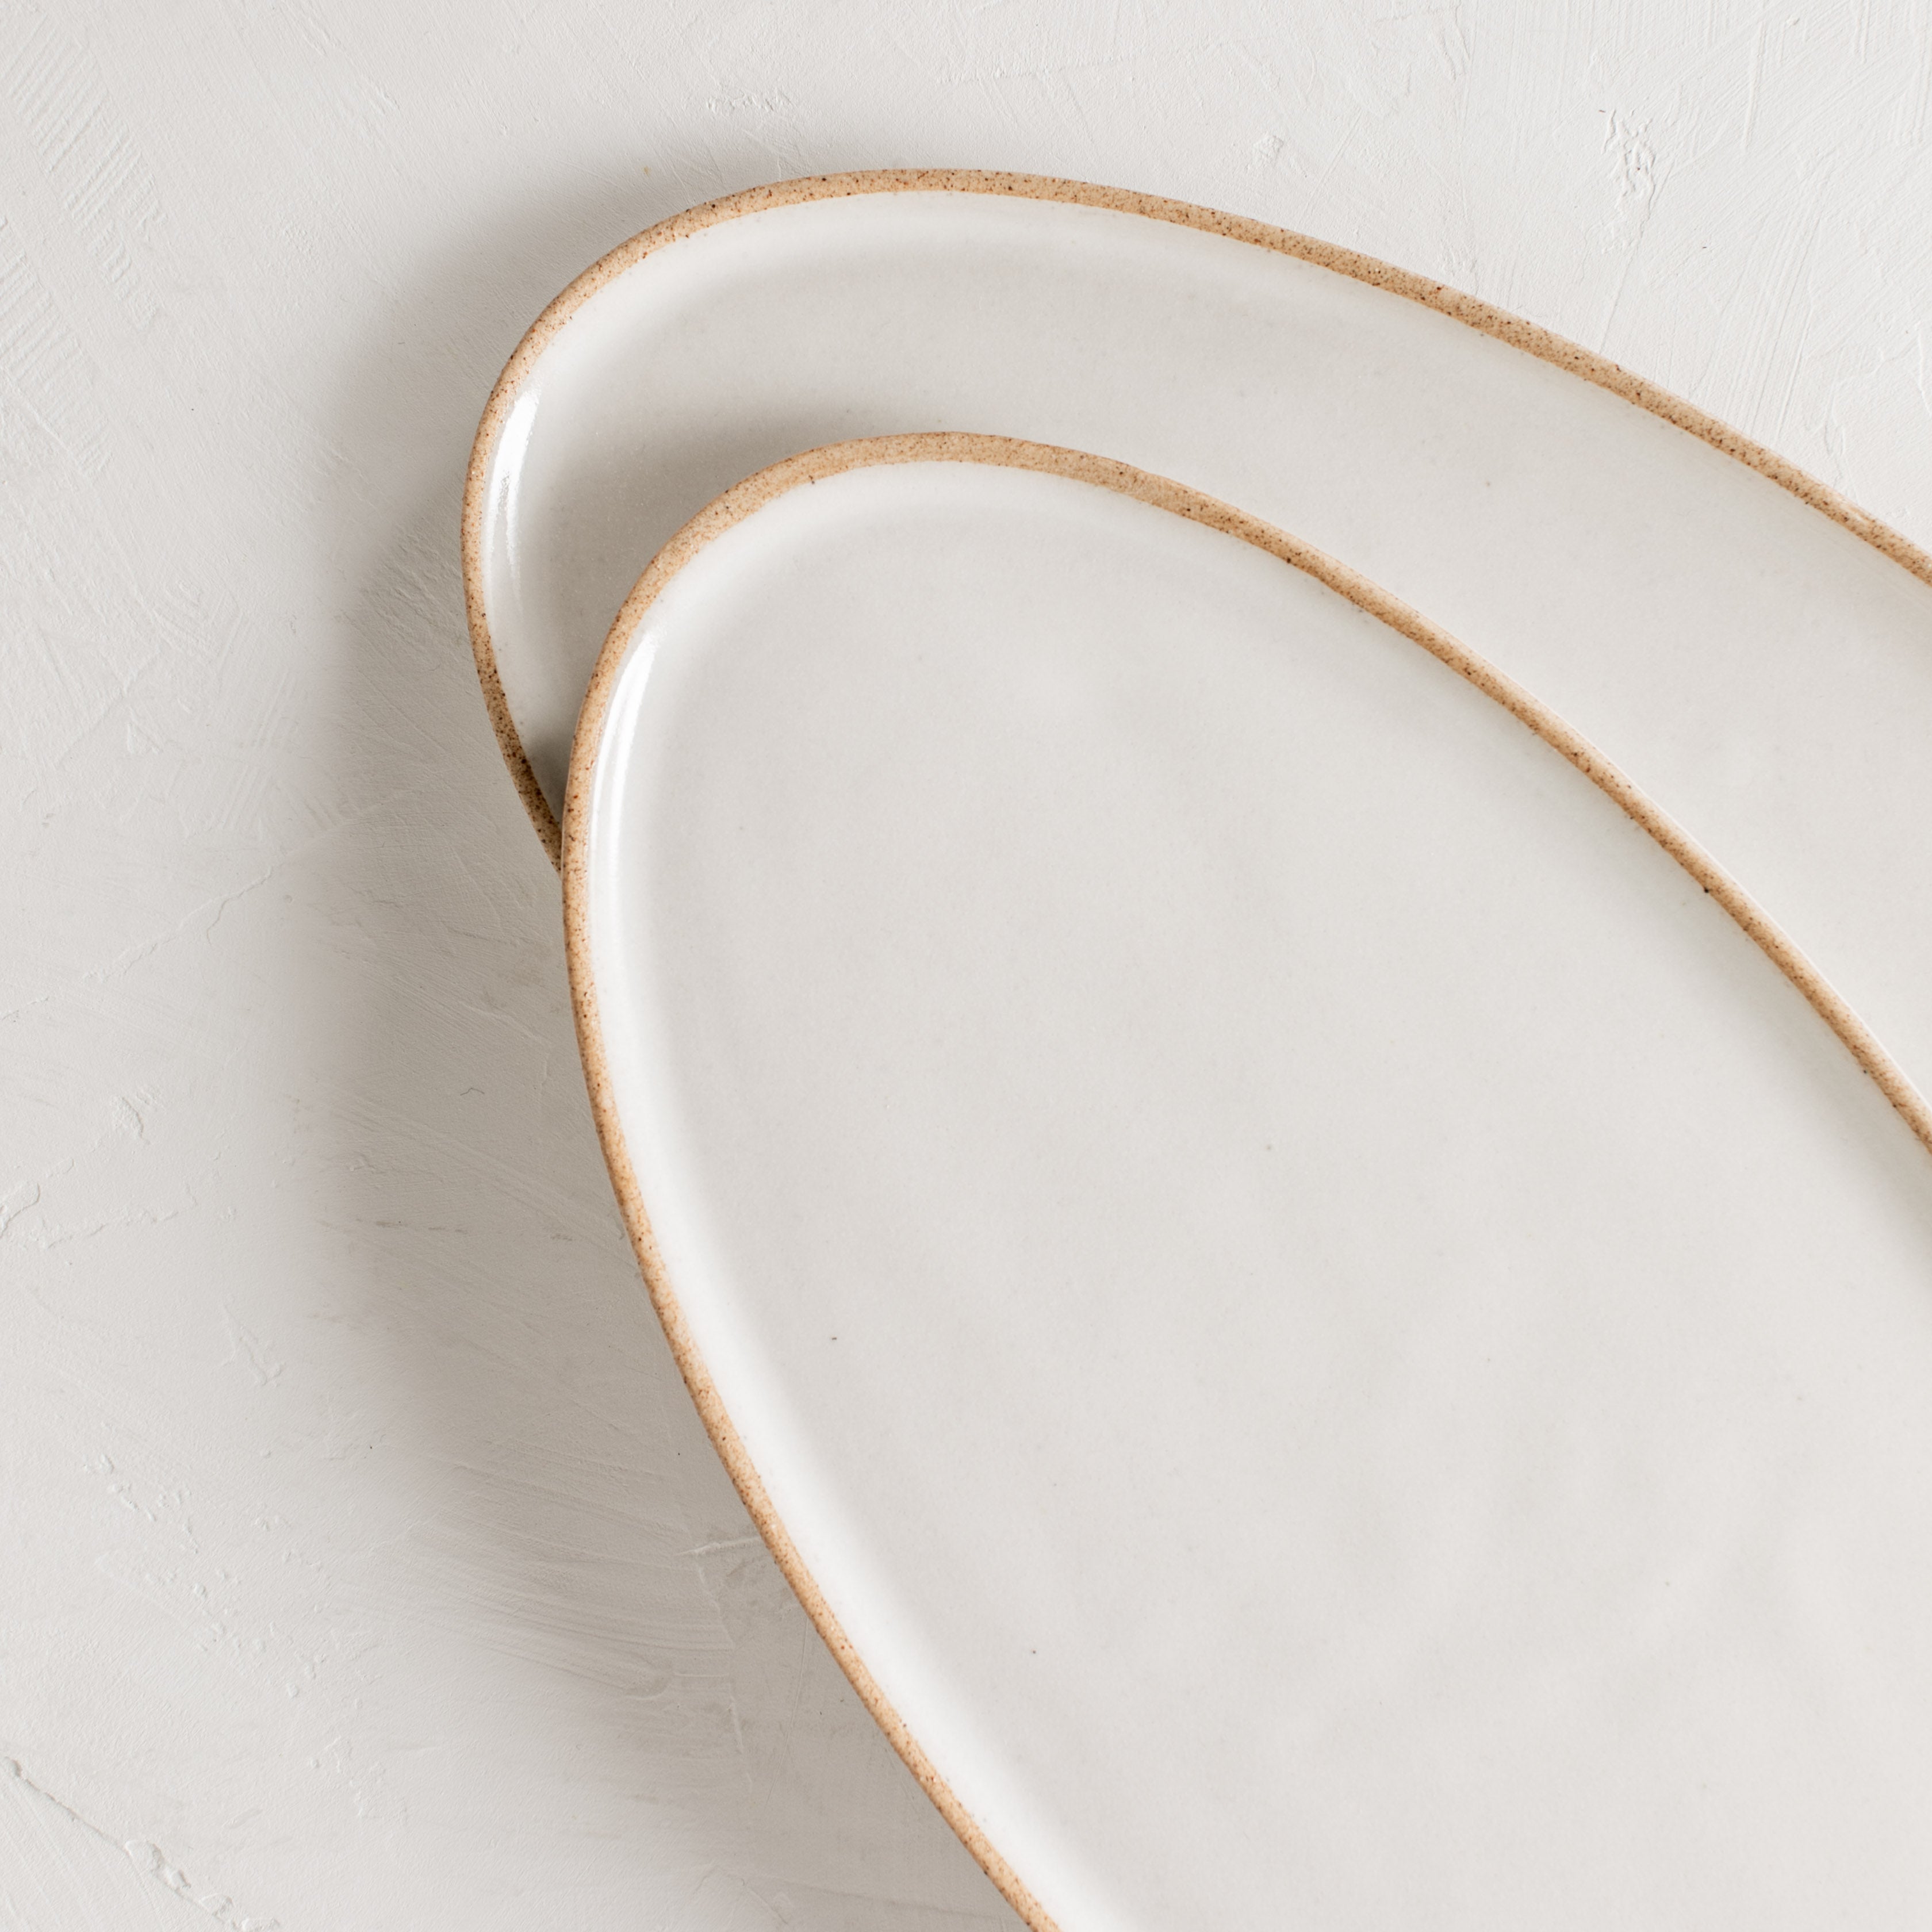 Two narrow vertical ceramic oval serving trays staggered and overlapping on a white textured table-top. Close up of the white ivory glazed with exposed stoneware rim. Handmade ceramic serving tray, designed and sold by Convivial Production, Kansas City ceramics.  